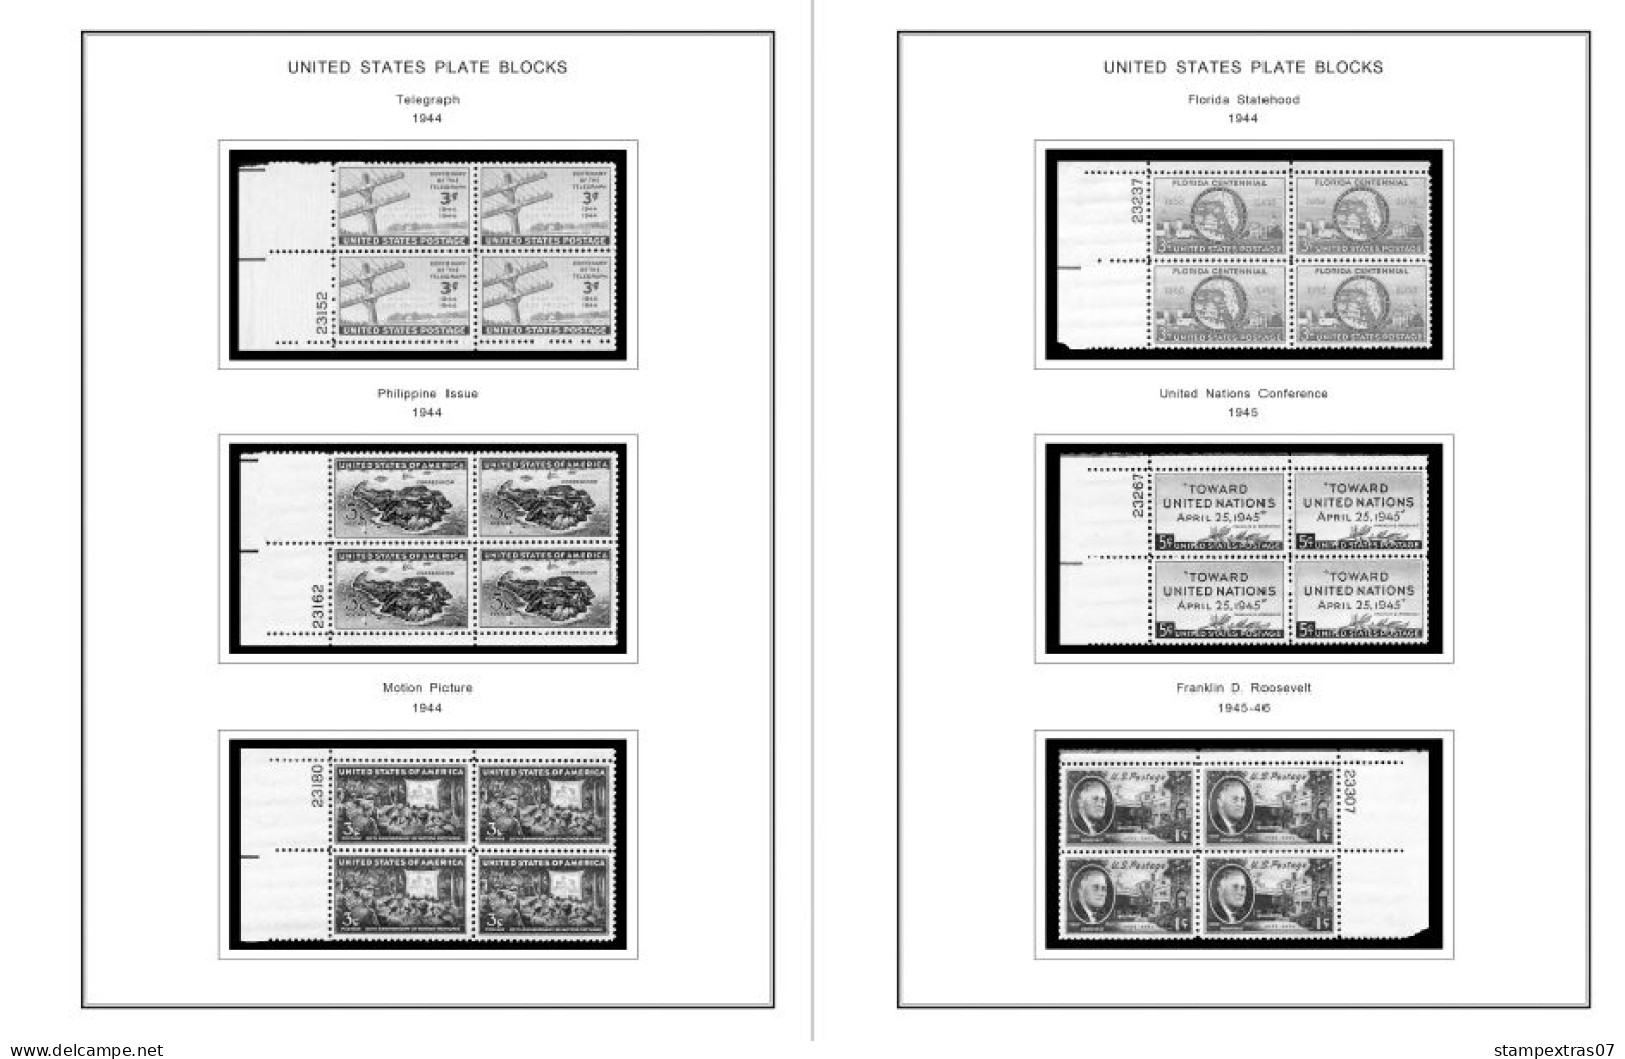 US 1940-1949 PLATE BLOCKS STAMP ALBUM PAGES (45 b&w illustrated pages)